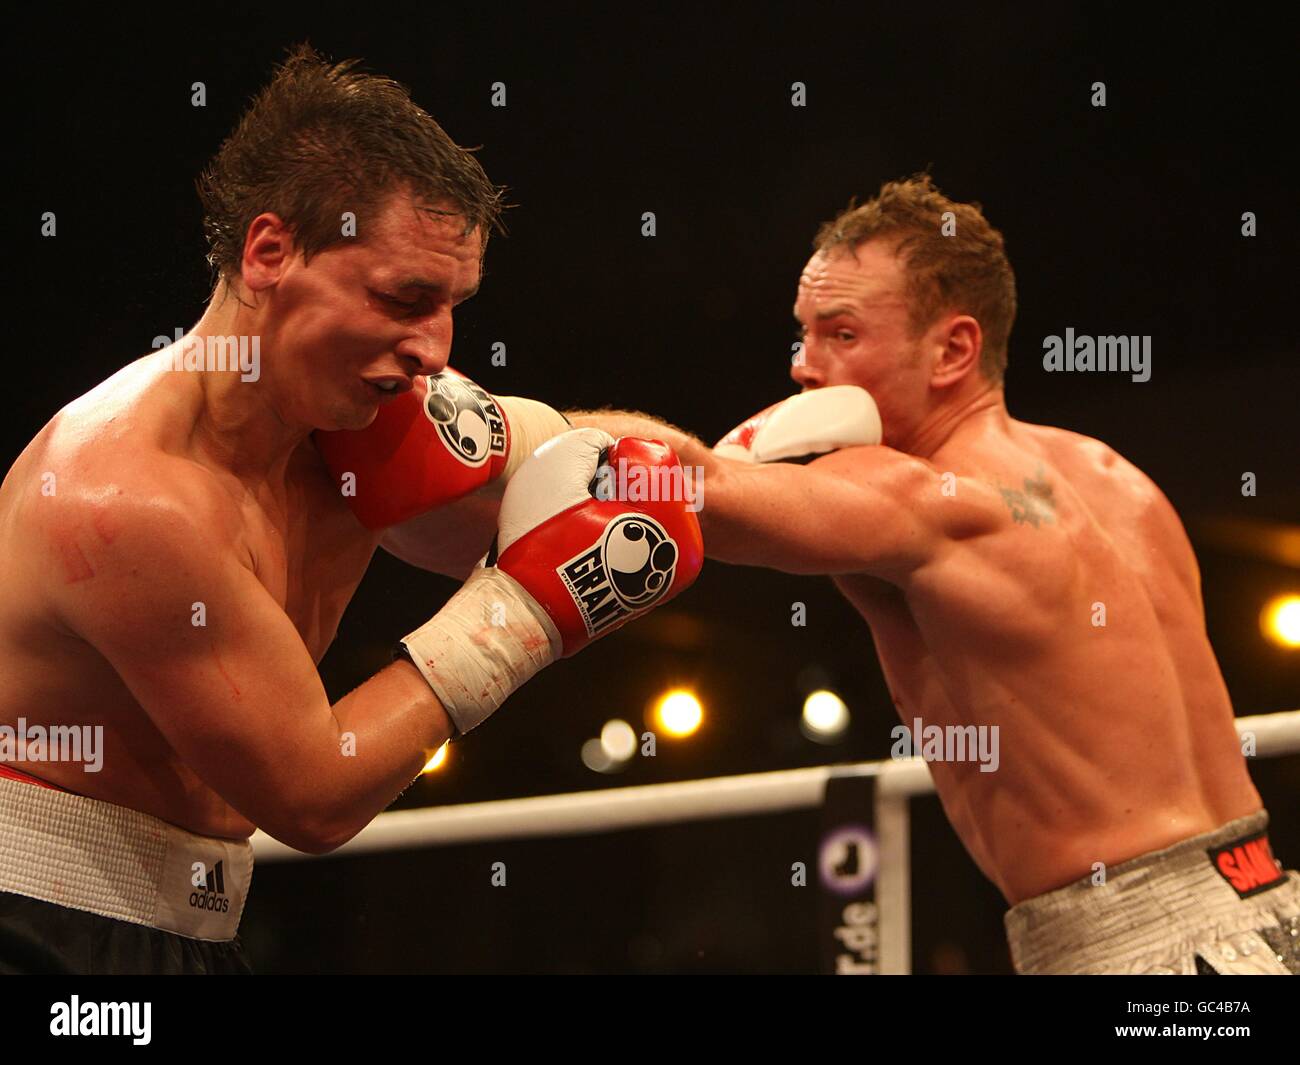 England's George Groves (right) on top against Bulgaria's Konstantin Makhankov during the undercard fight prior to the WBA World Heavyweight title fight between David Haye and Nikolai Valuev, at the Nuremberg Arena, Germany Stock Photo